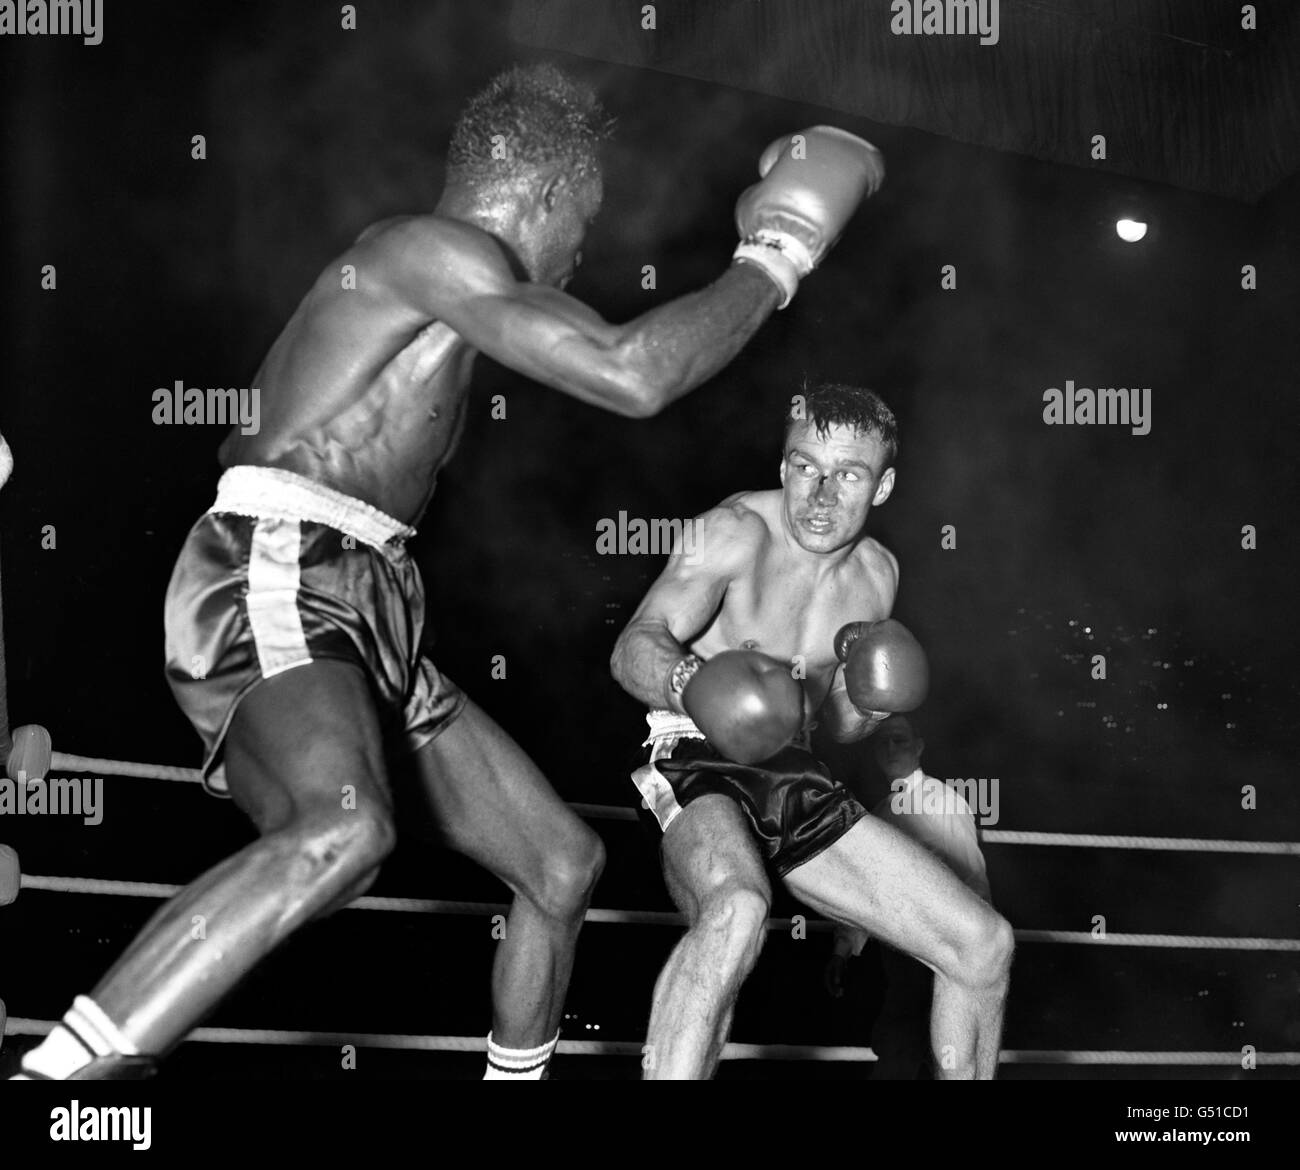 Britain's Dave Charnley (r) on the defensive as Joe Brown, from America, prepares to throw another punch. Joe Brown went on to win on points after 15 rounds. The fight was voted 1961 Ring Magazine Fight of the Year. Stock Photo